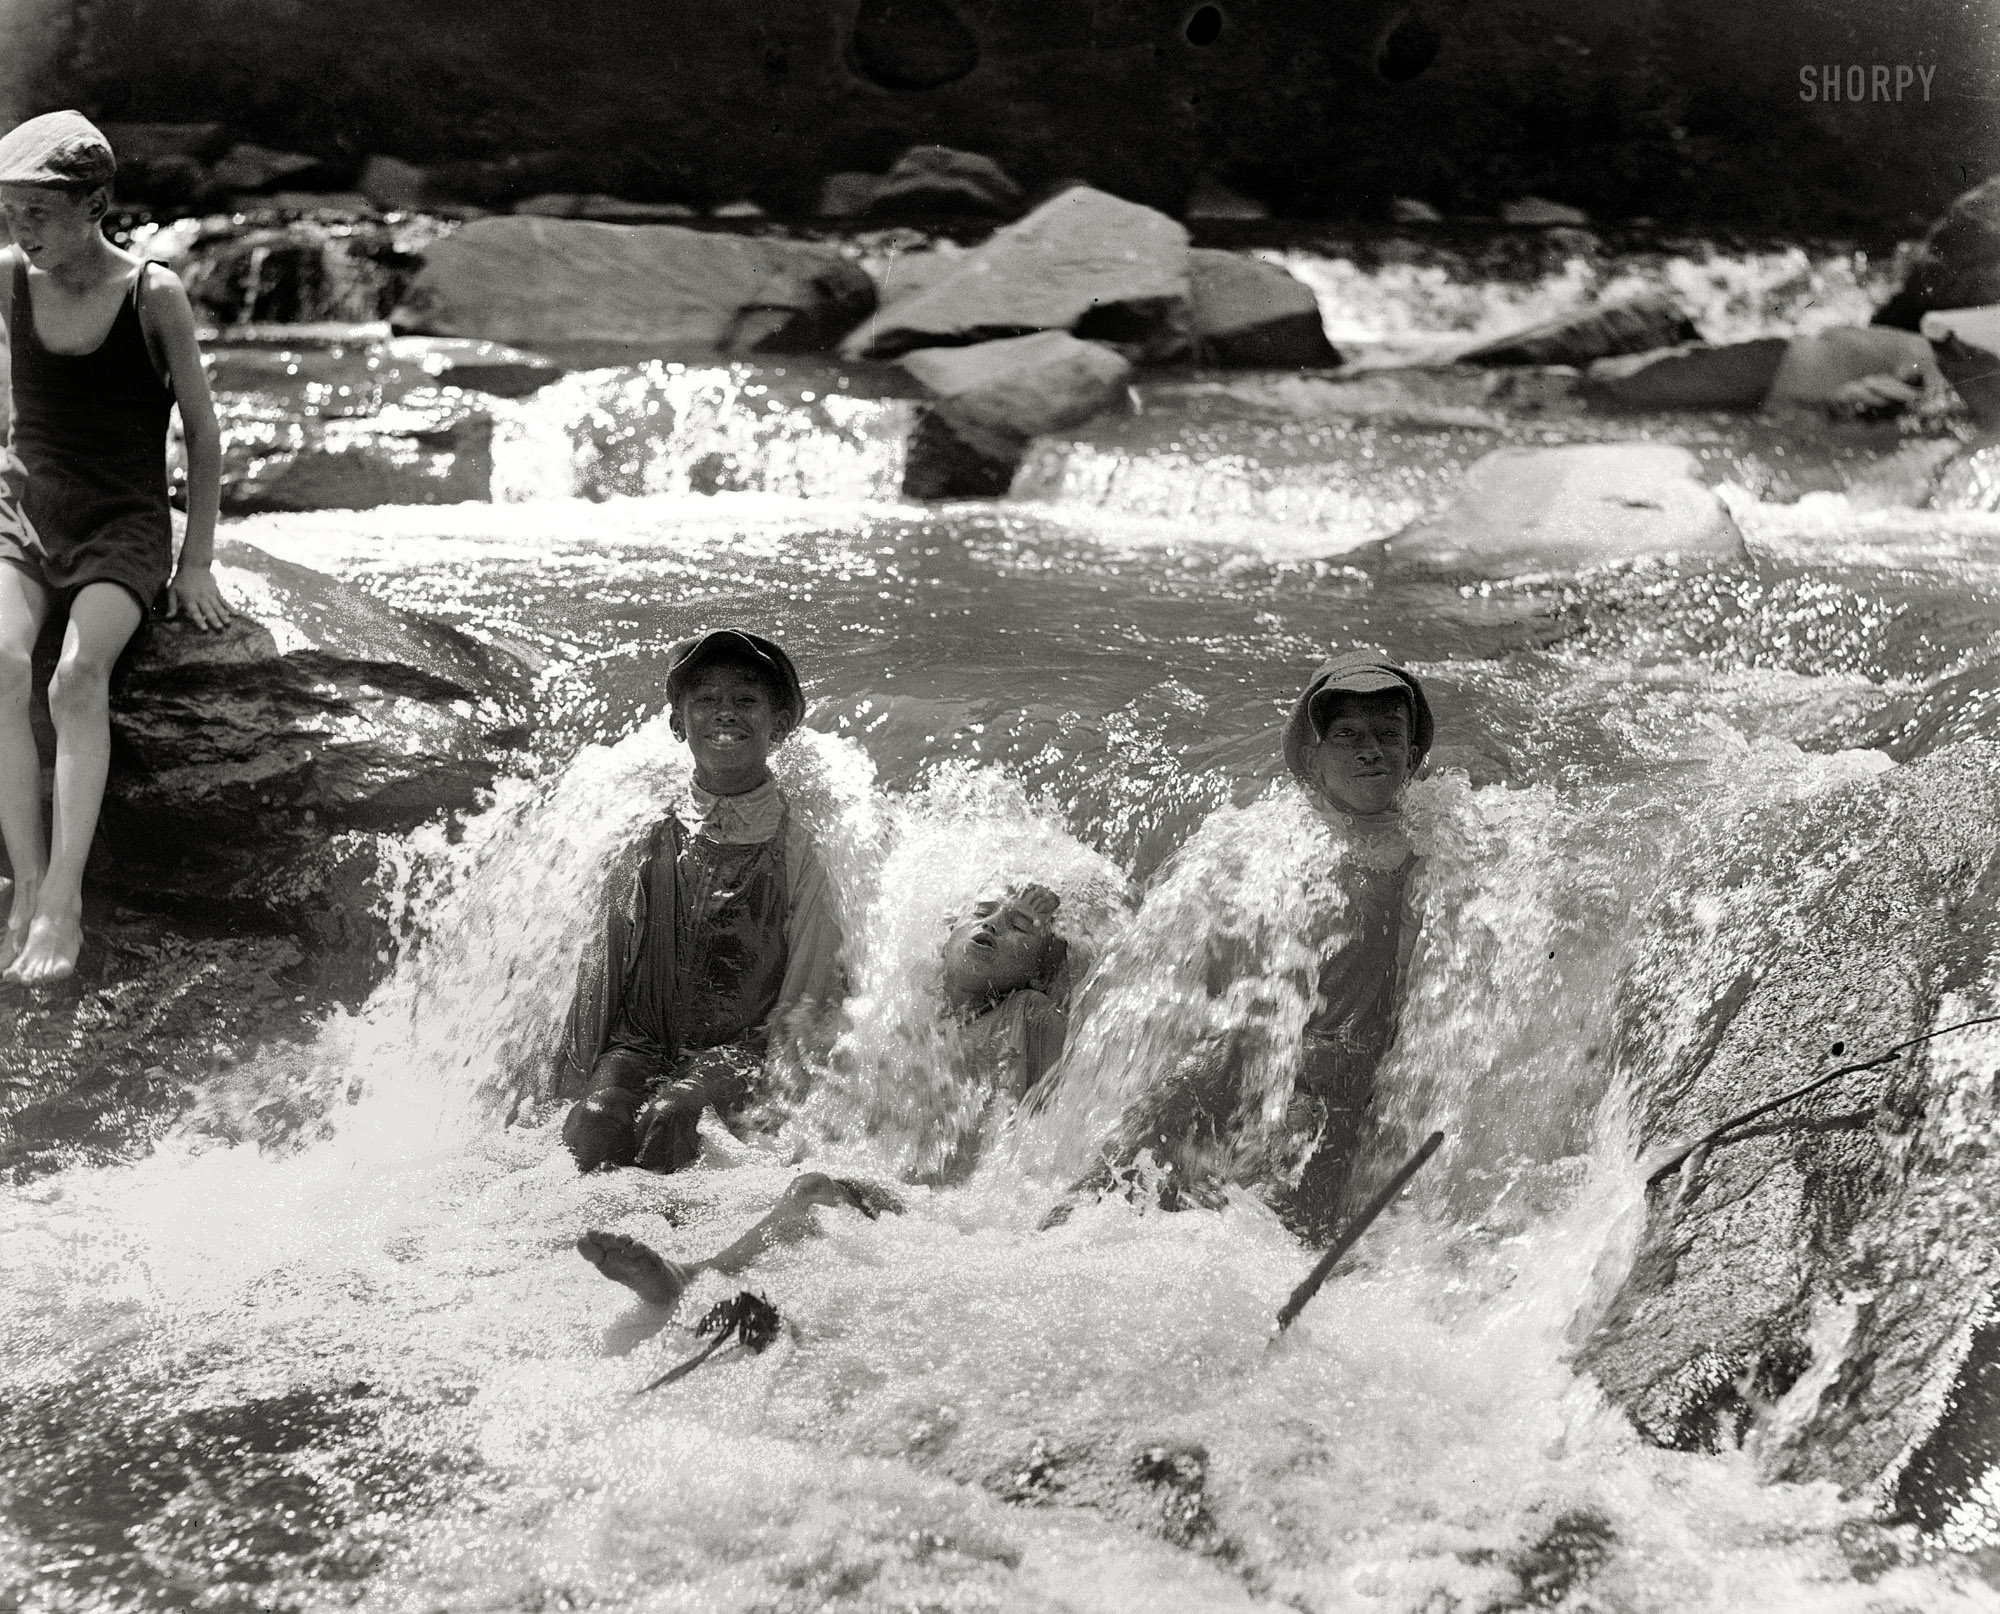 July 28, 1921. Washington, D.C. "Relief from hot weather. Bathing at Rock Creek Park." National Photo Company Collection glass negative. View full size.